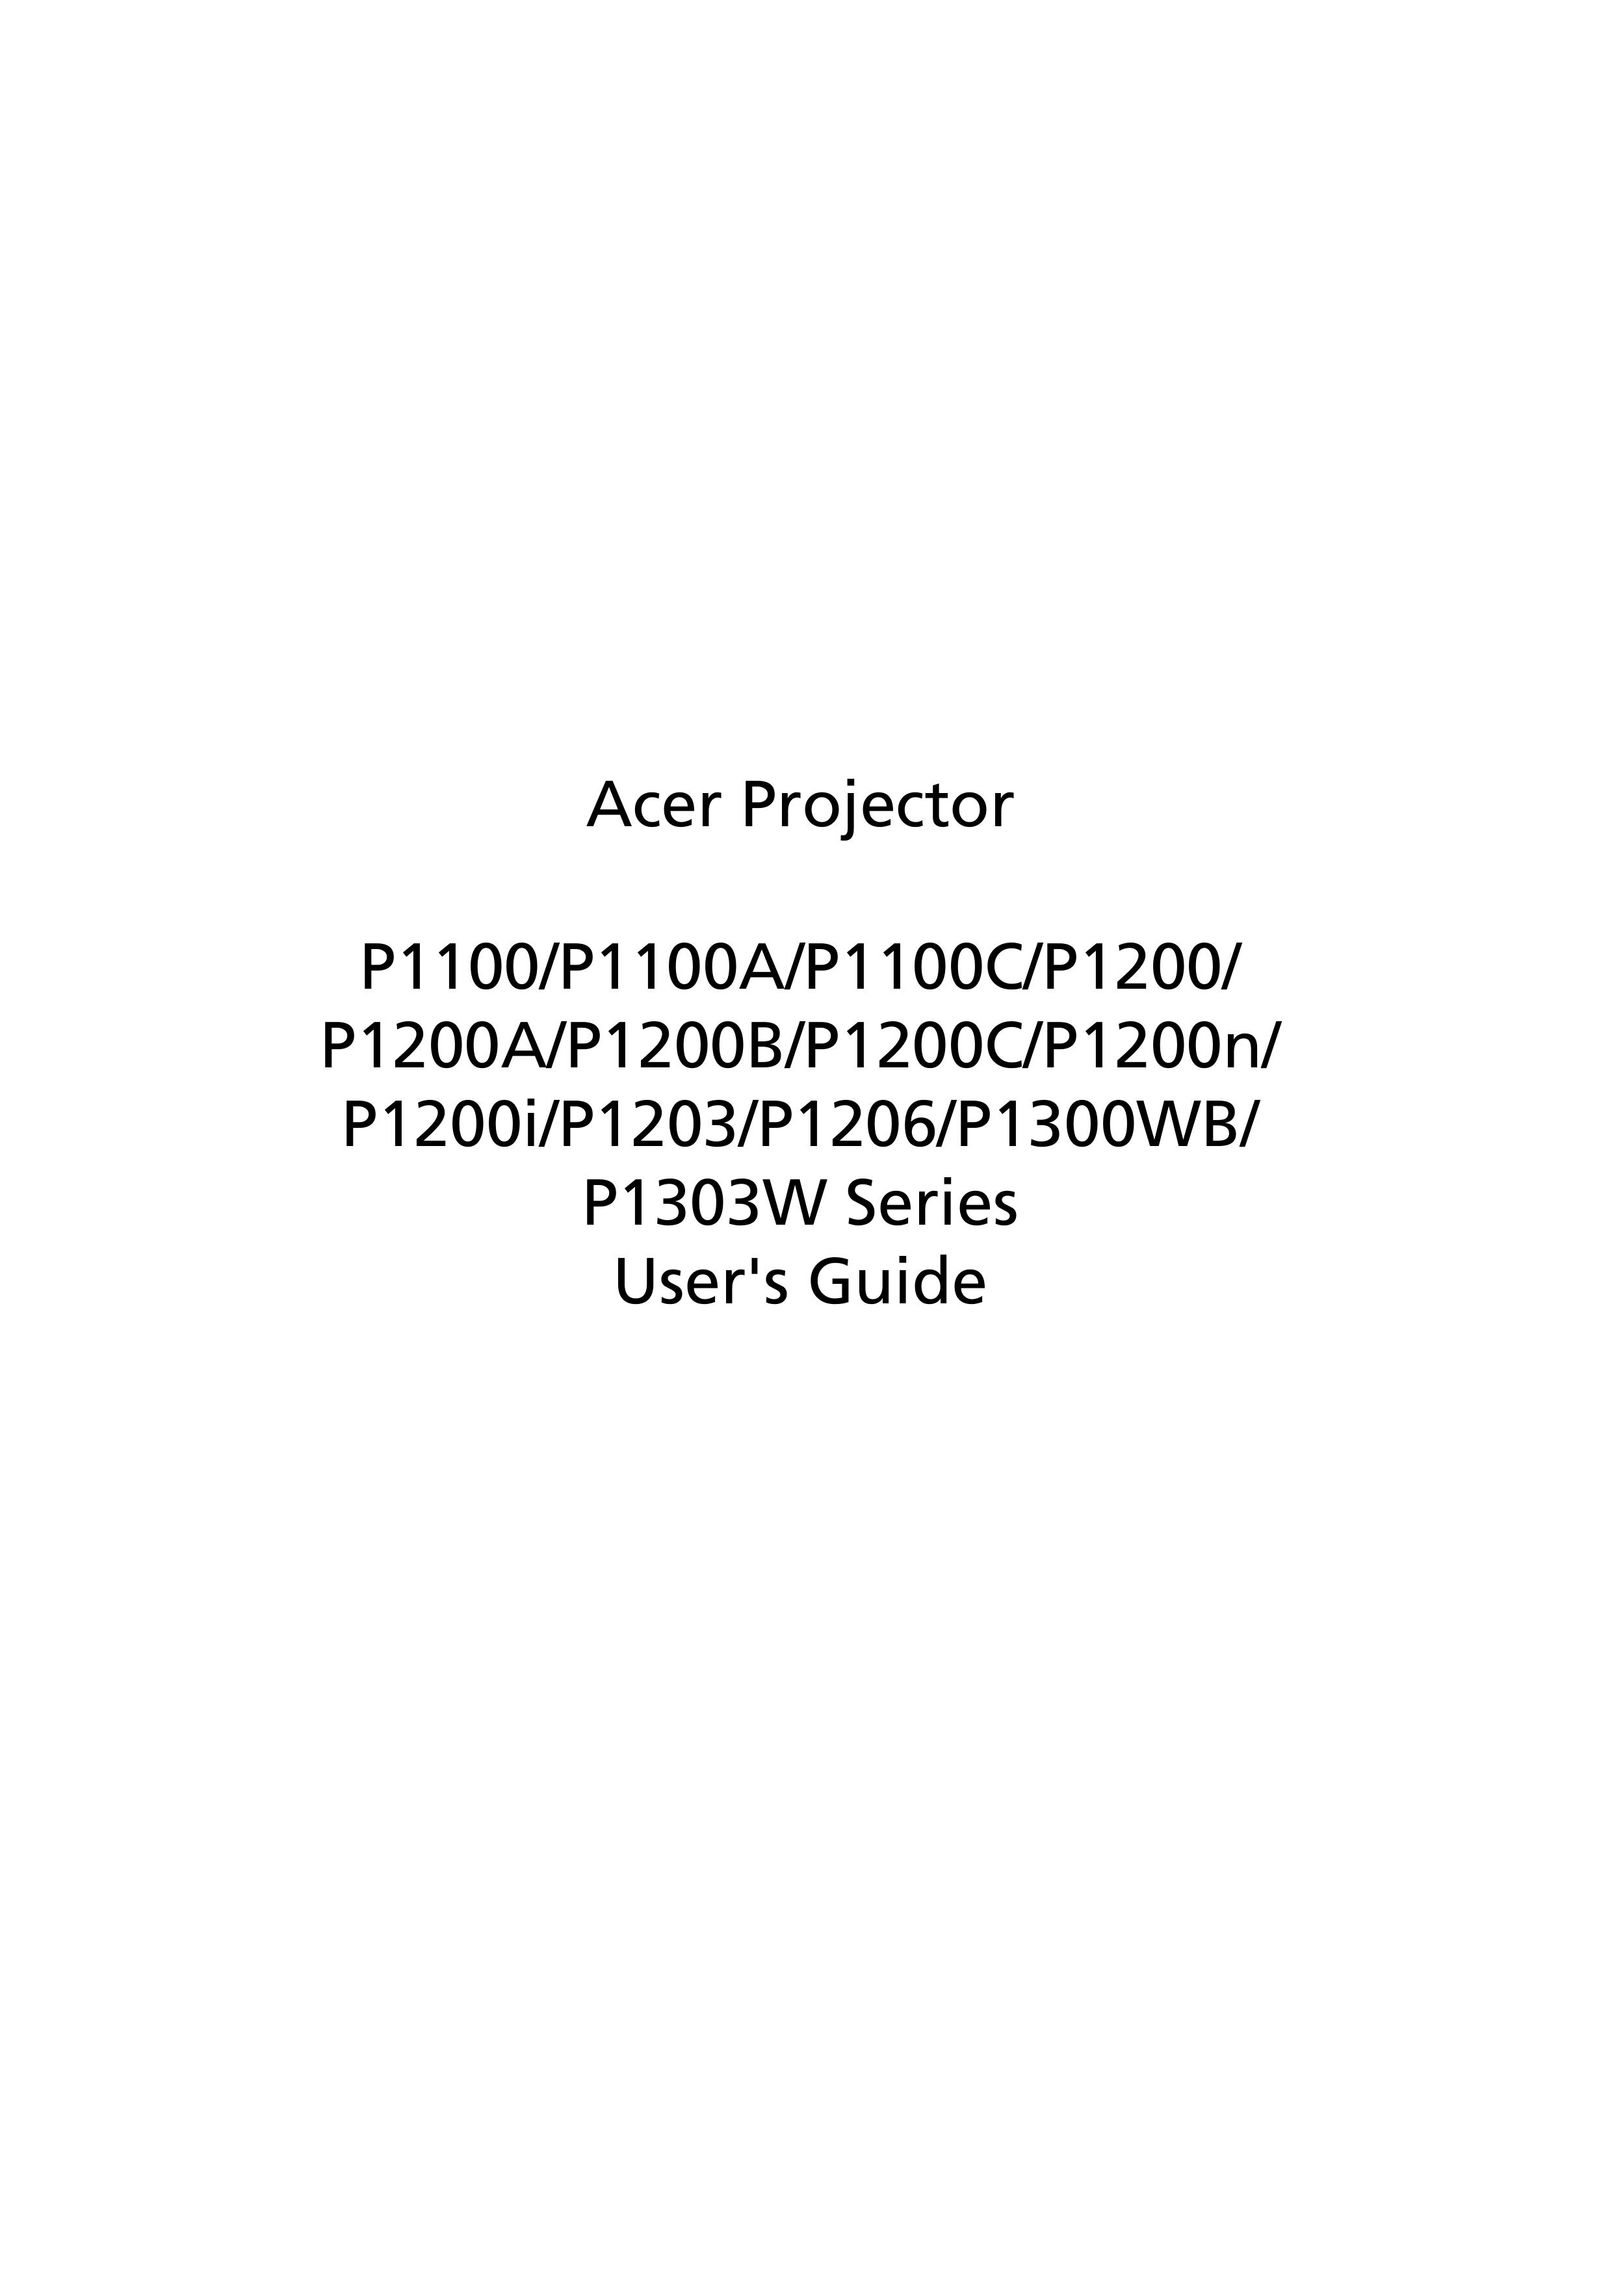 Acer P1203 Projector User Manual